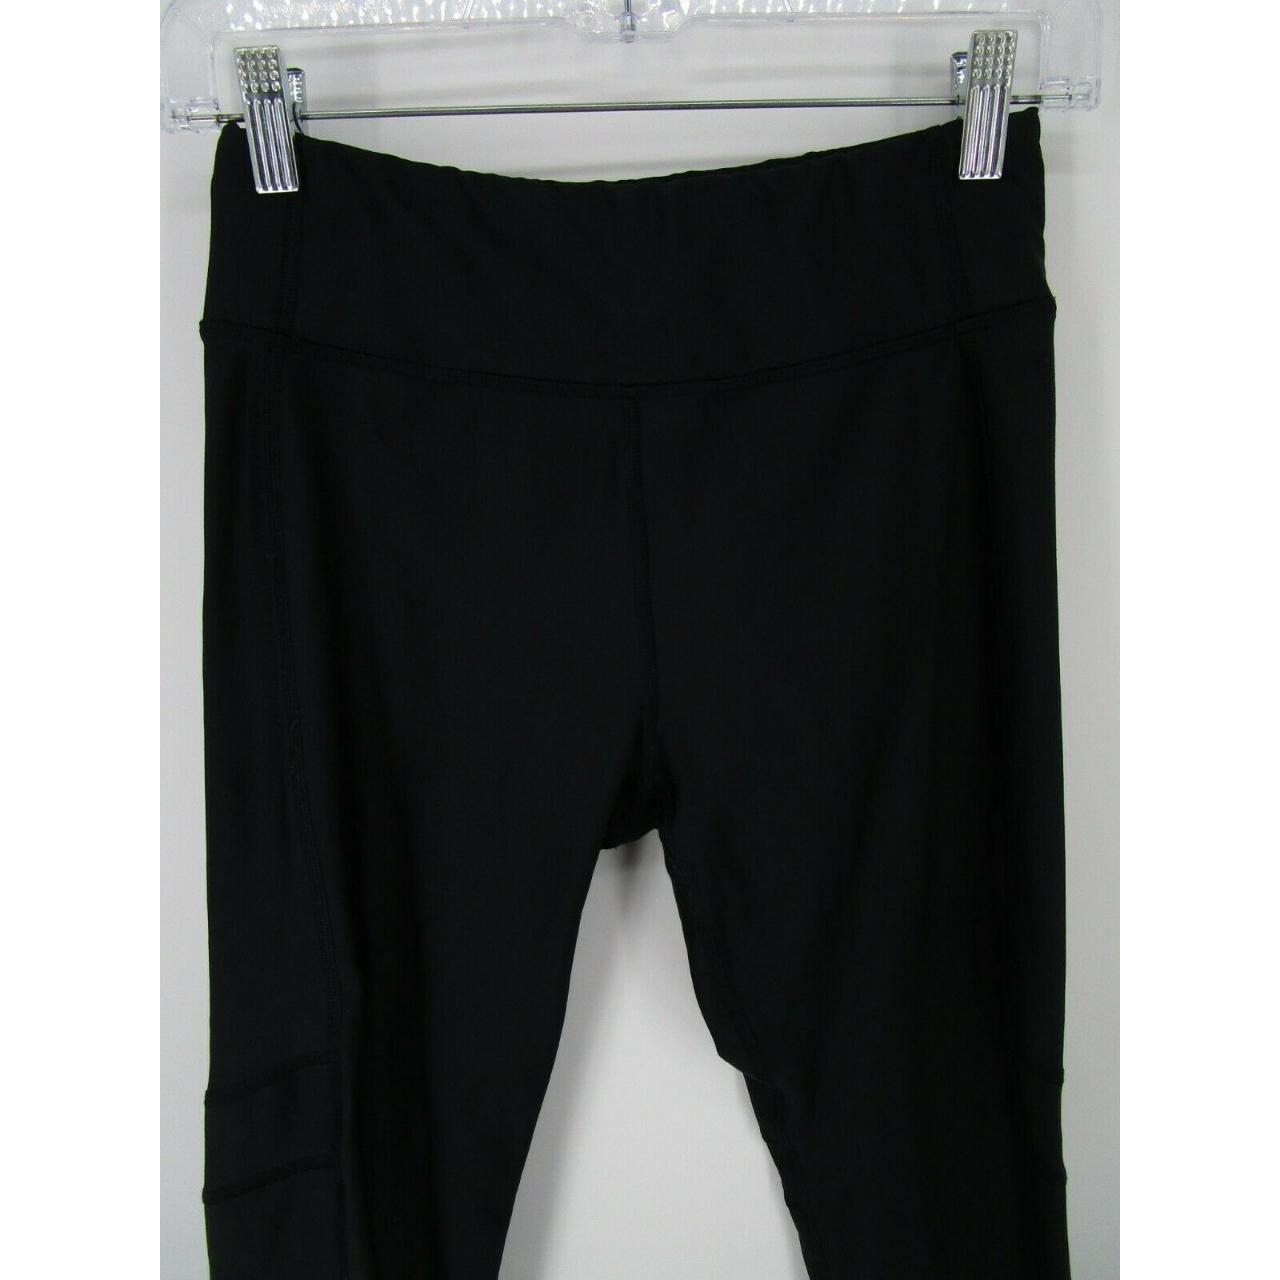 Product Image 4 - Under Armour Leggings Women Small